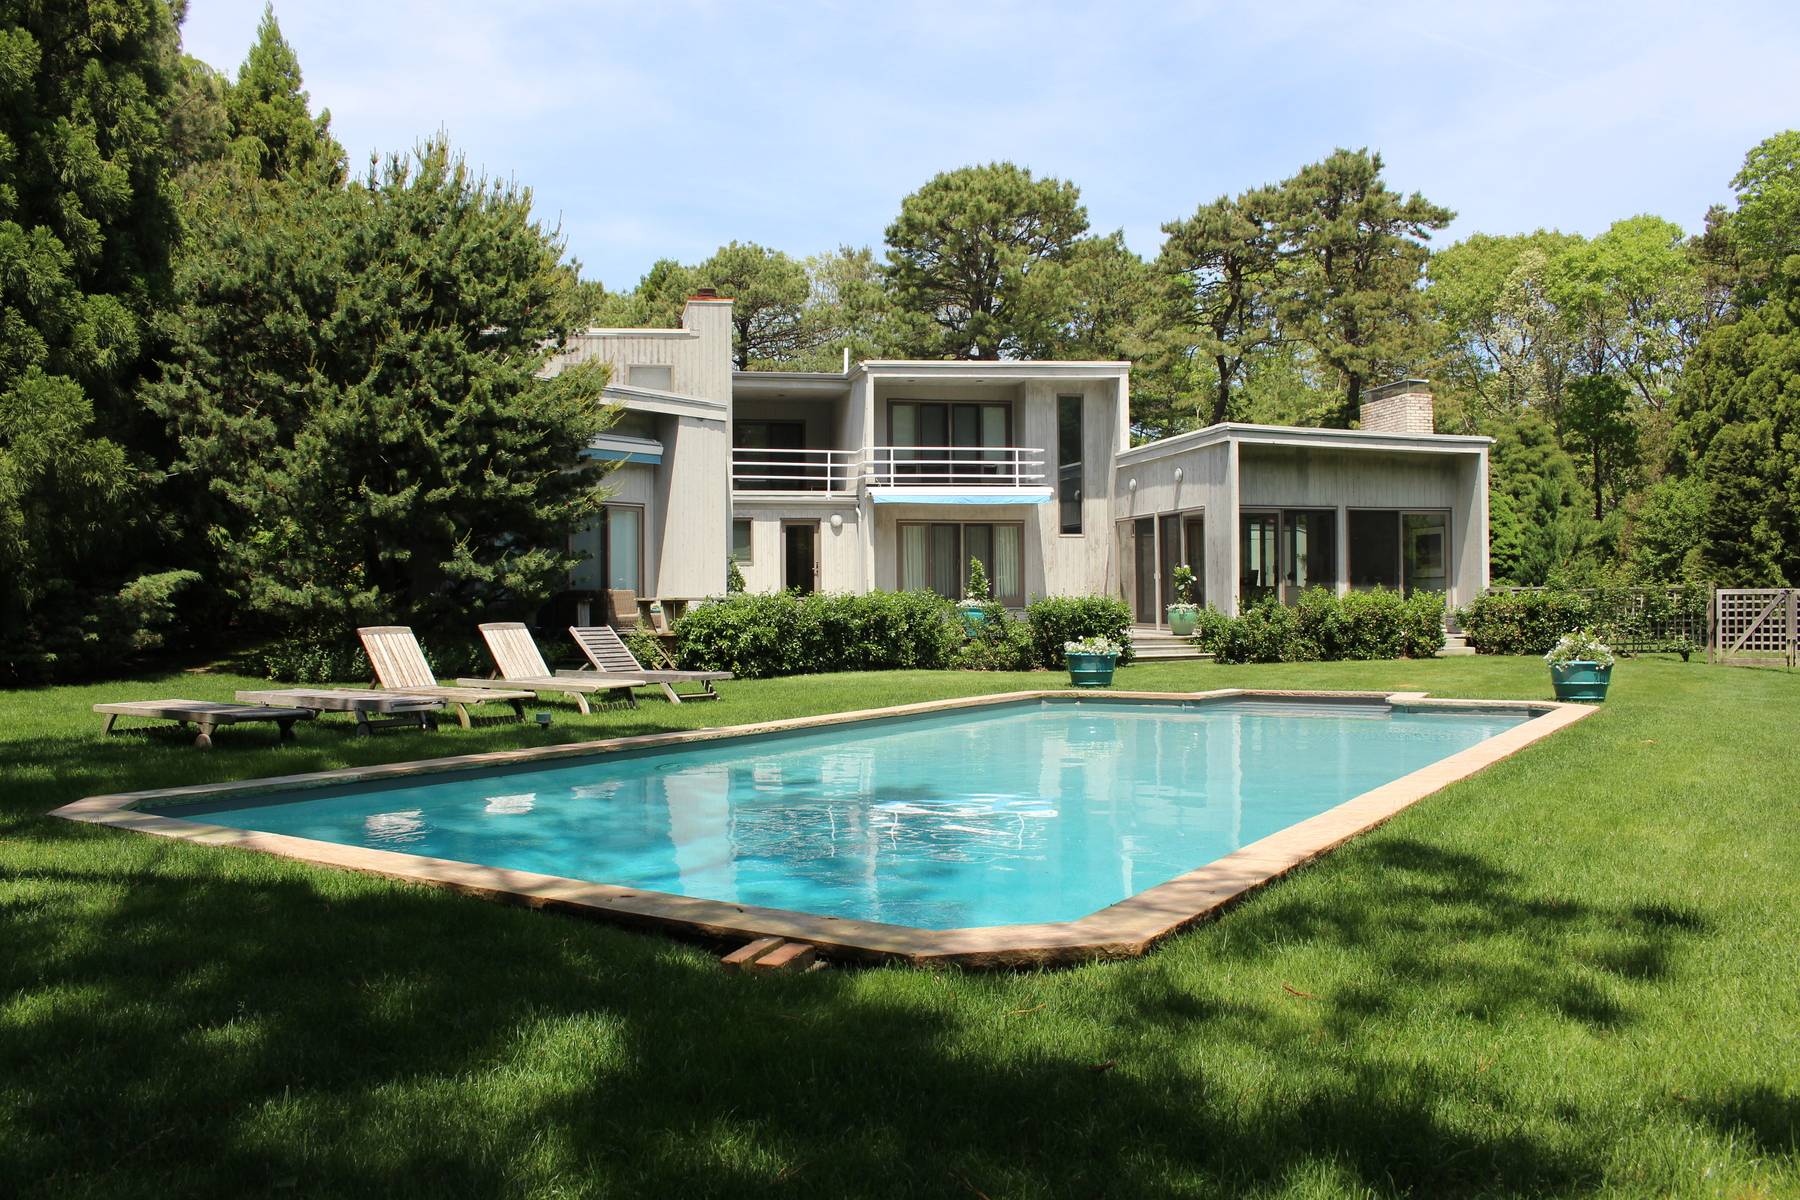 WAINSCOTT SOUTH - DESIGNERS OWN - 4 BEDROOM FOR AUGUST